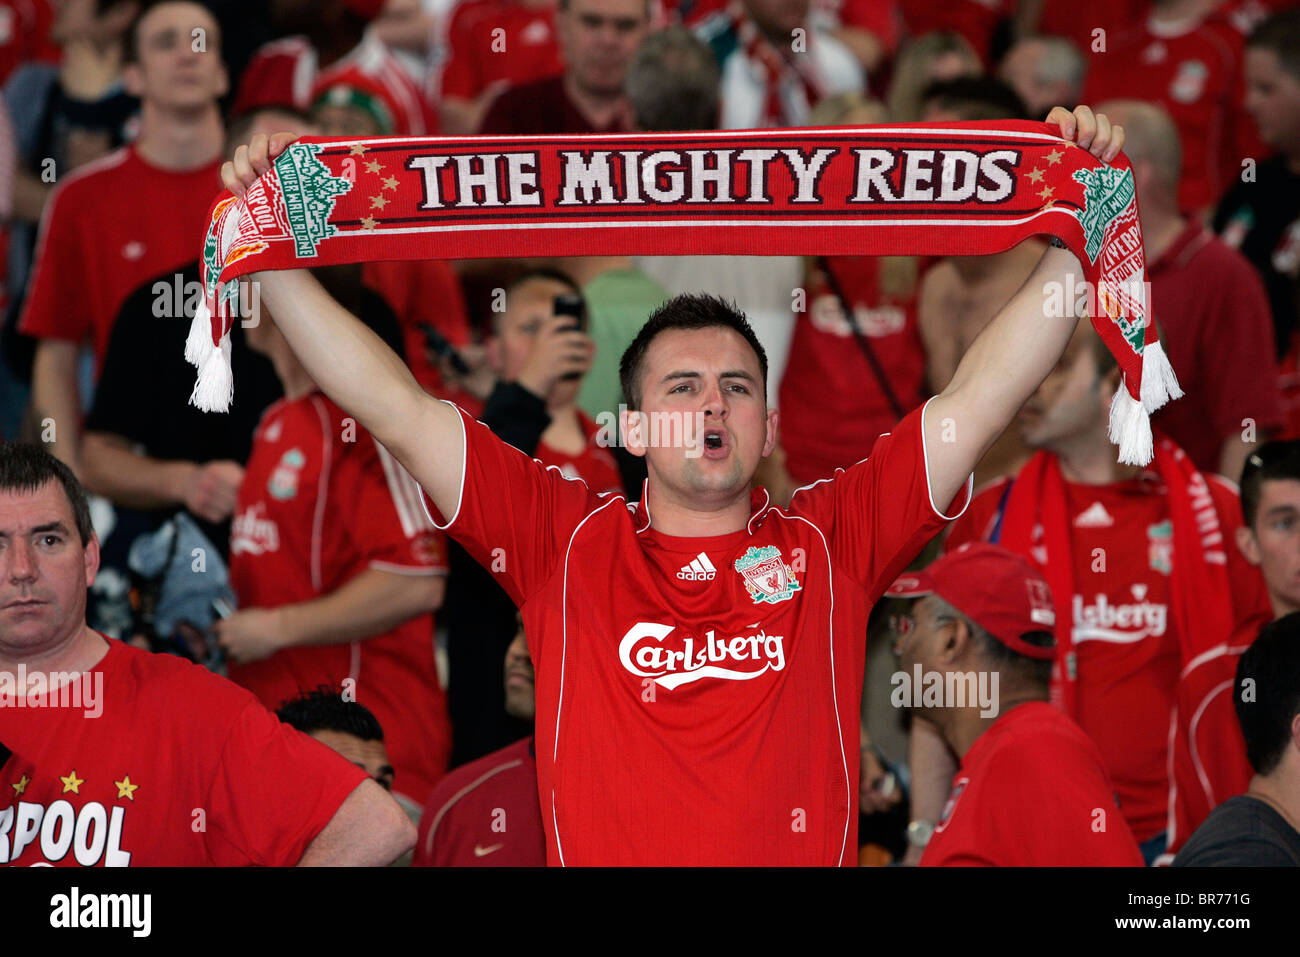 A Liverpool football fan holds up a scarf in the stands during a match Stock Photo